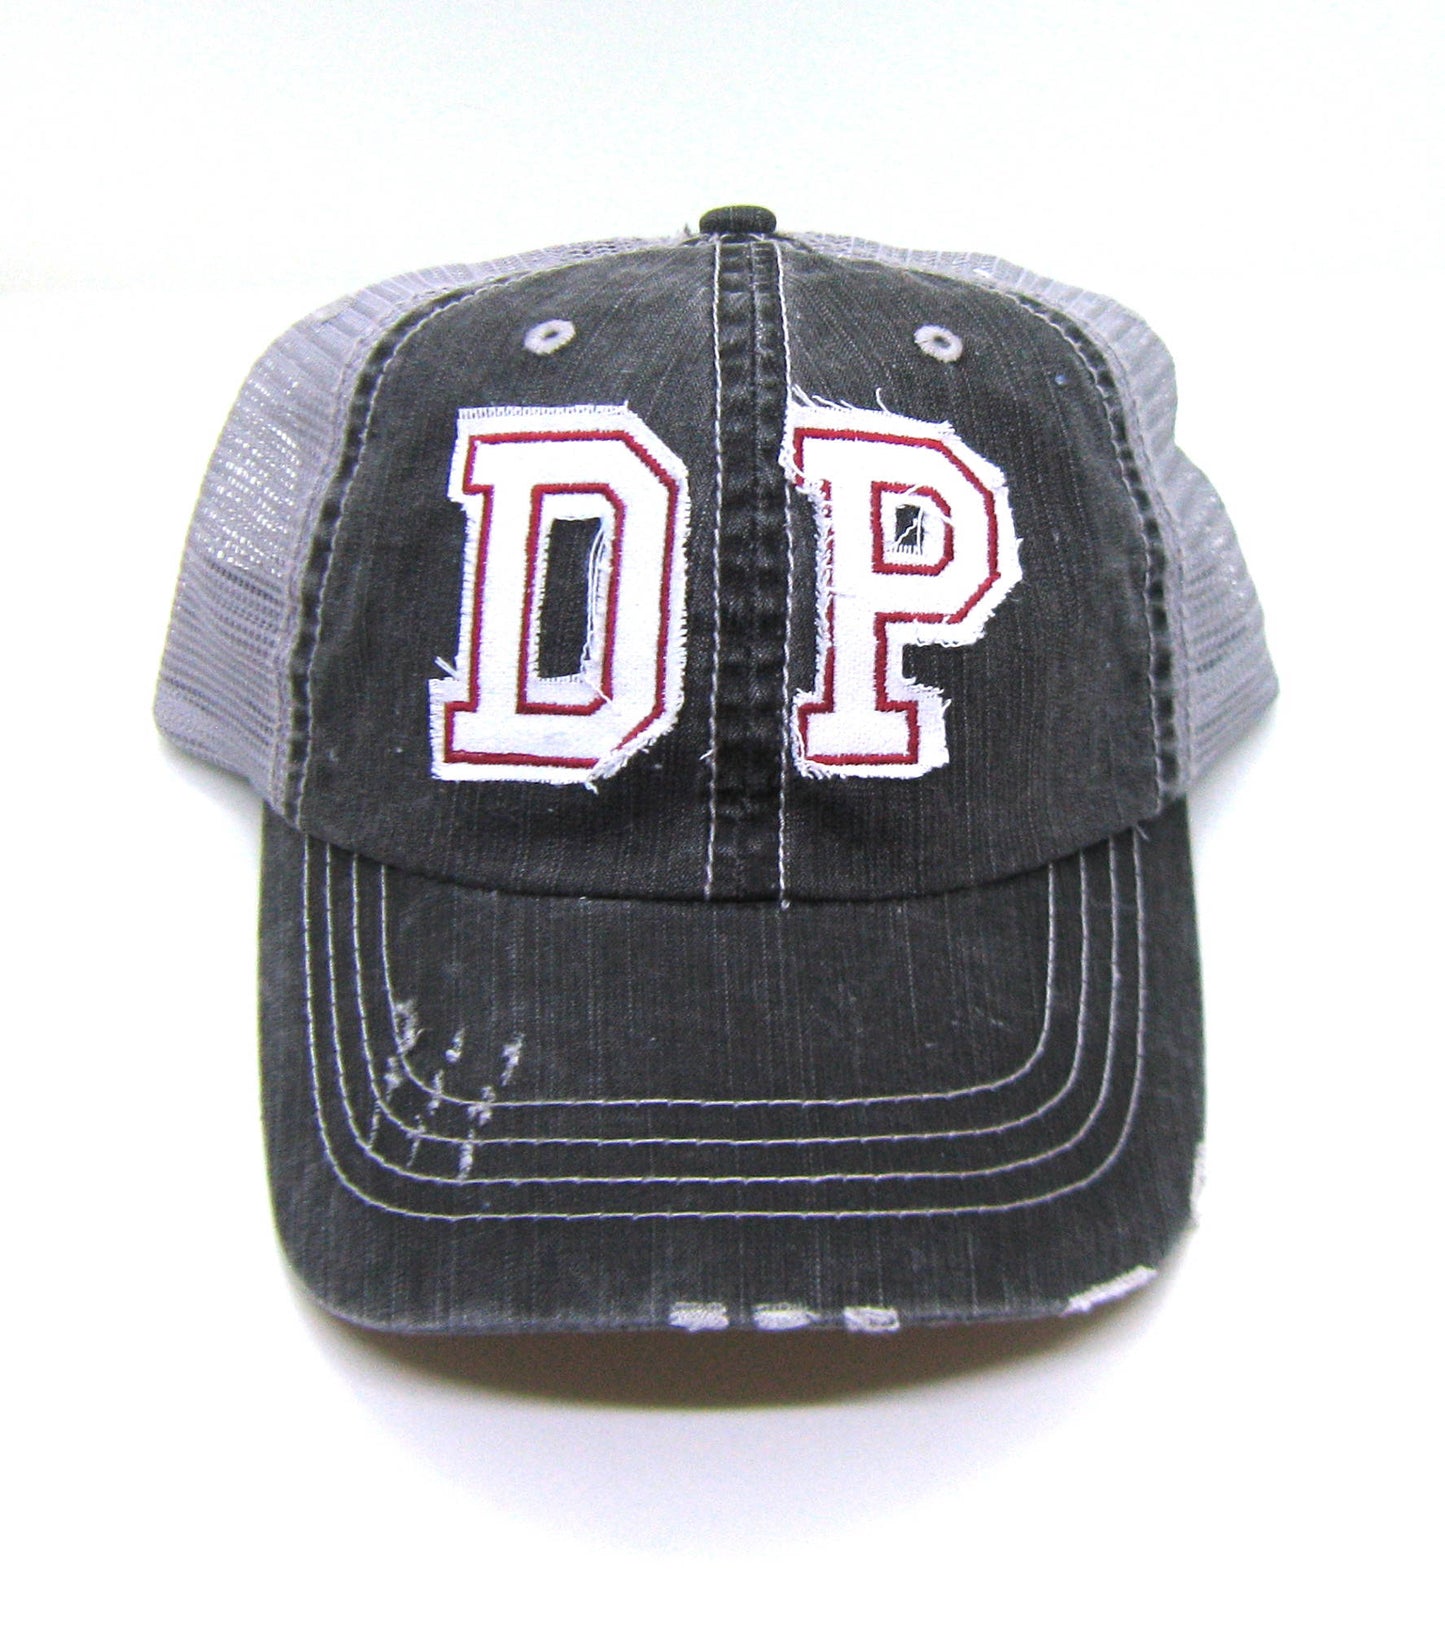 Gray Distressed Trucker Hat - DP De Pere Hat - White Lettering with Cardinal Red Stitiching